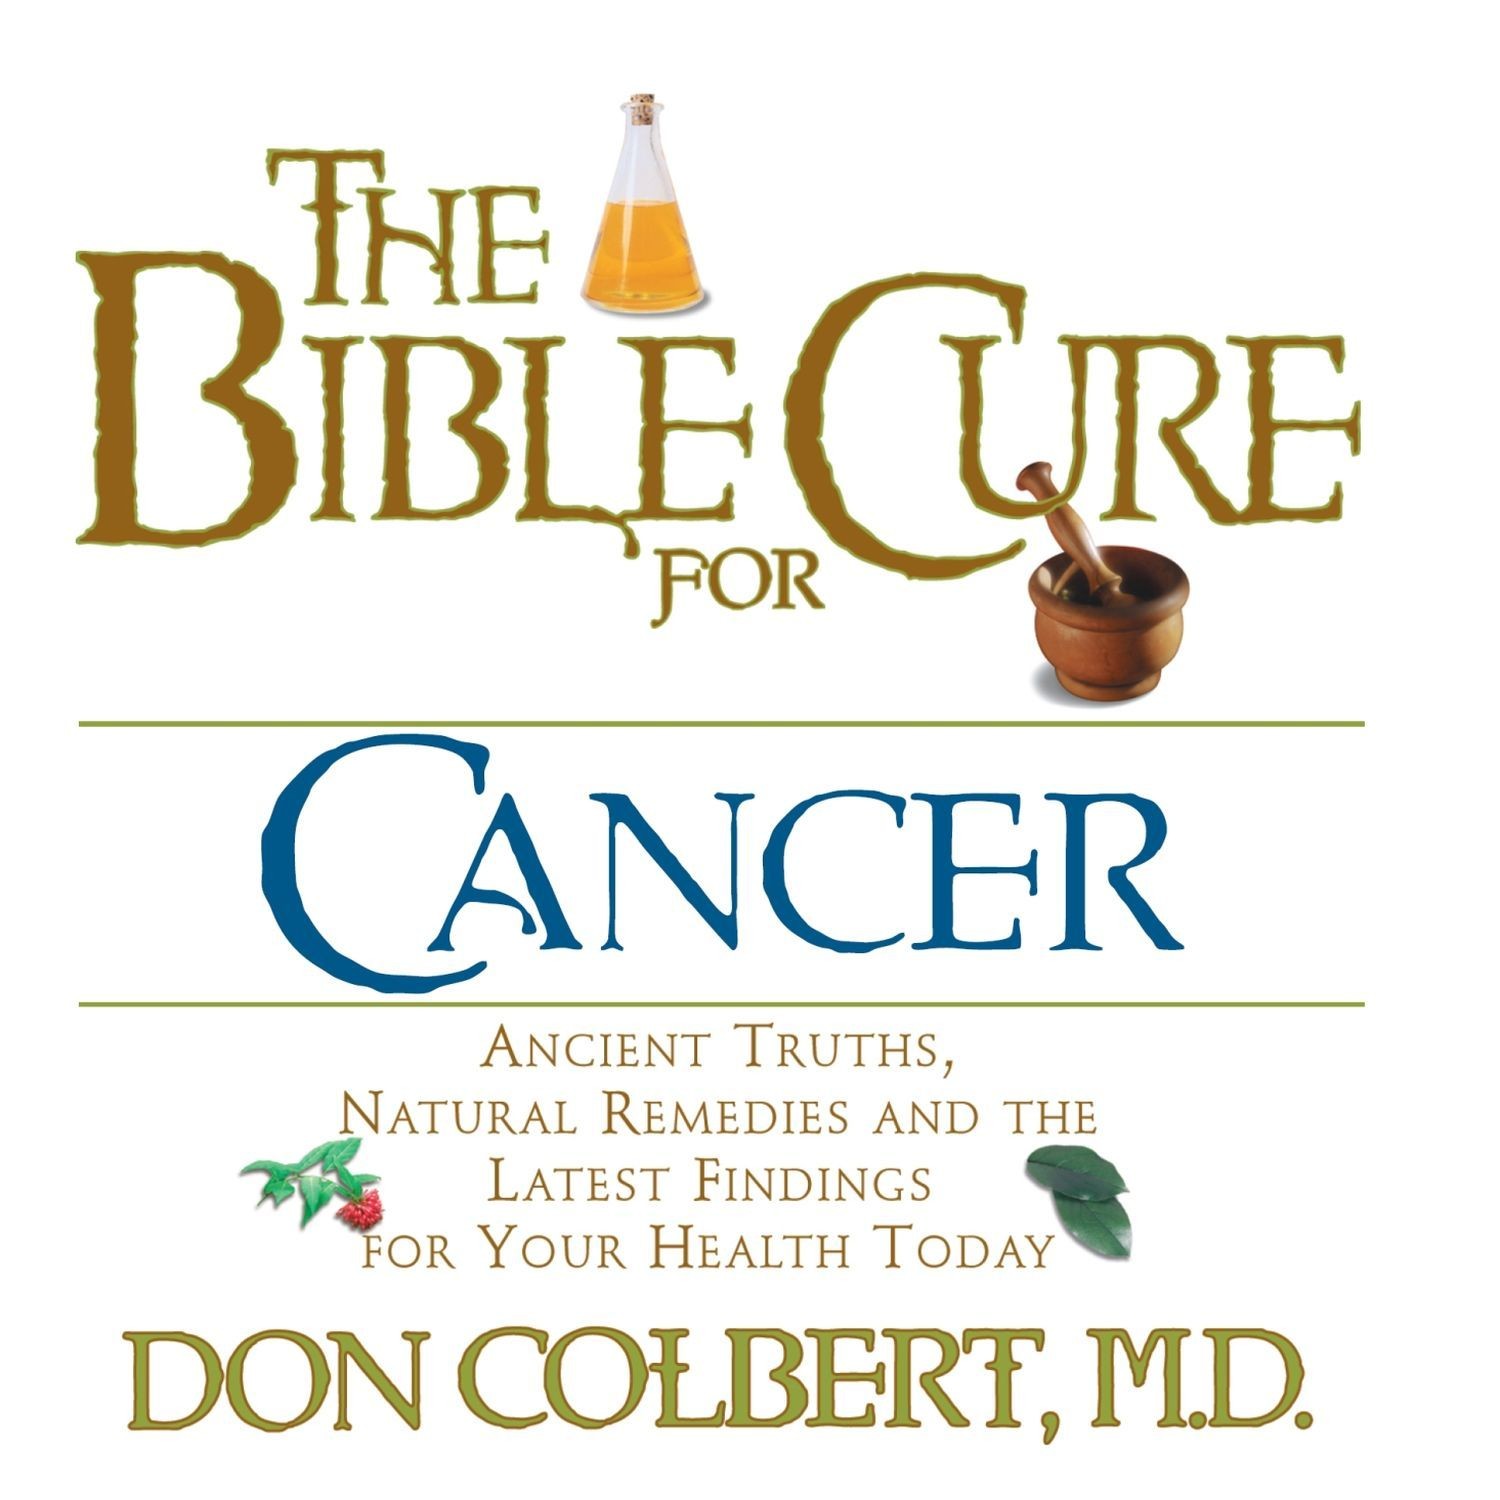 The Bible Cure for Cancer: Ancient Truths, Natural Remedies and the Latest Findings for Your Health Today Audiobook, by Don Colbert